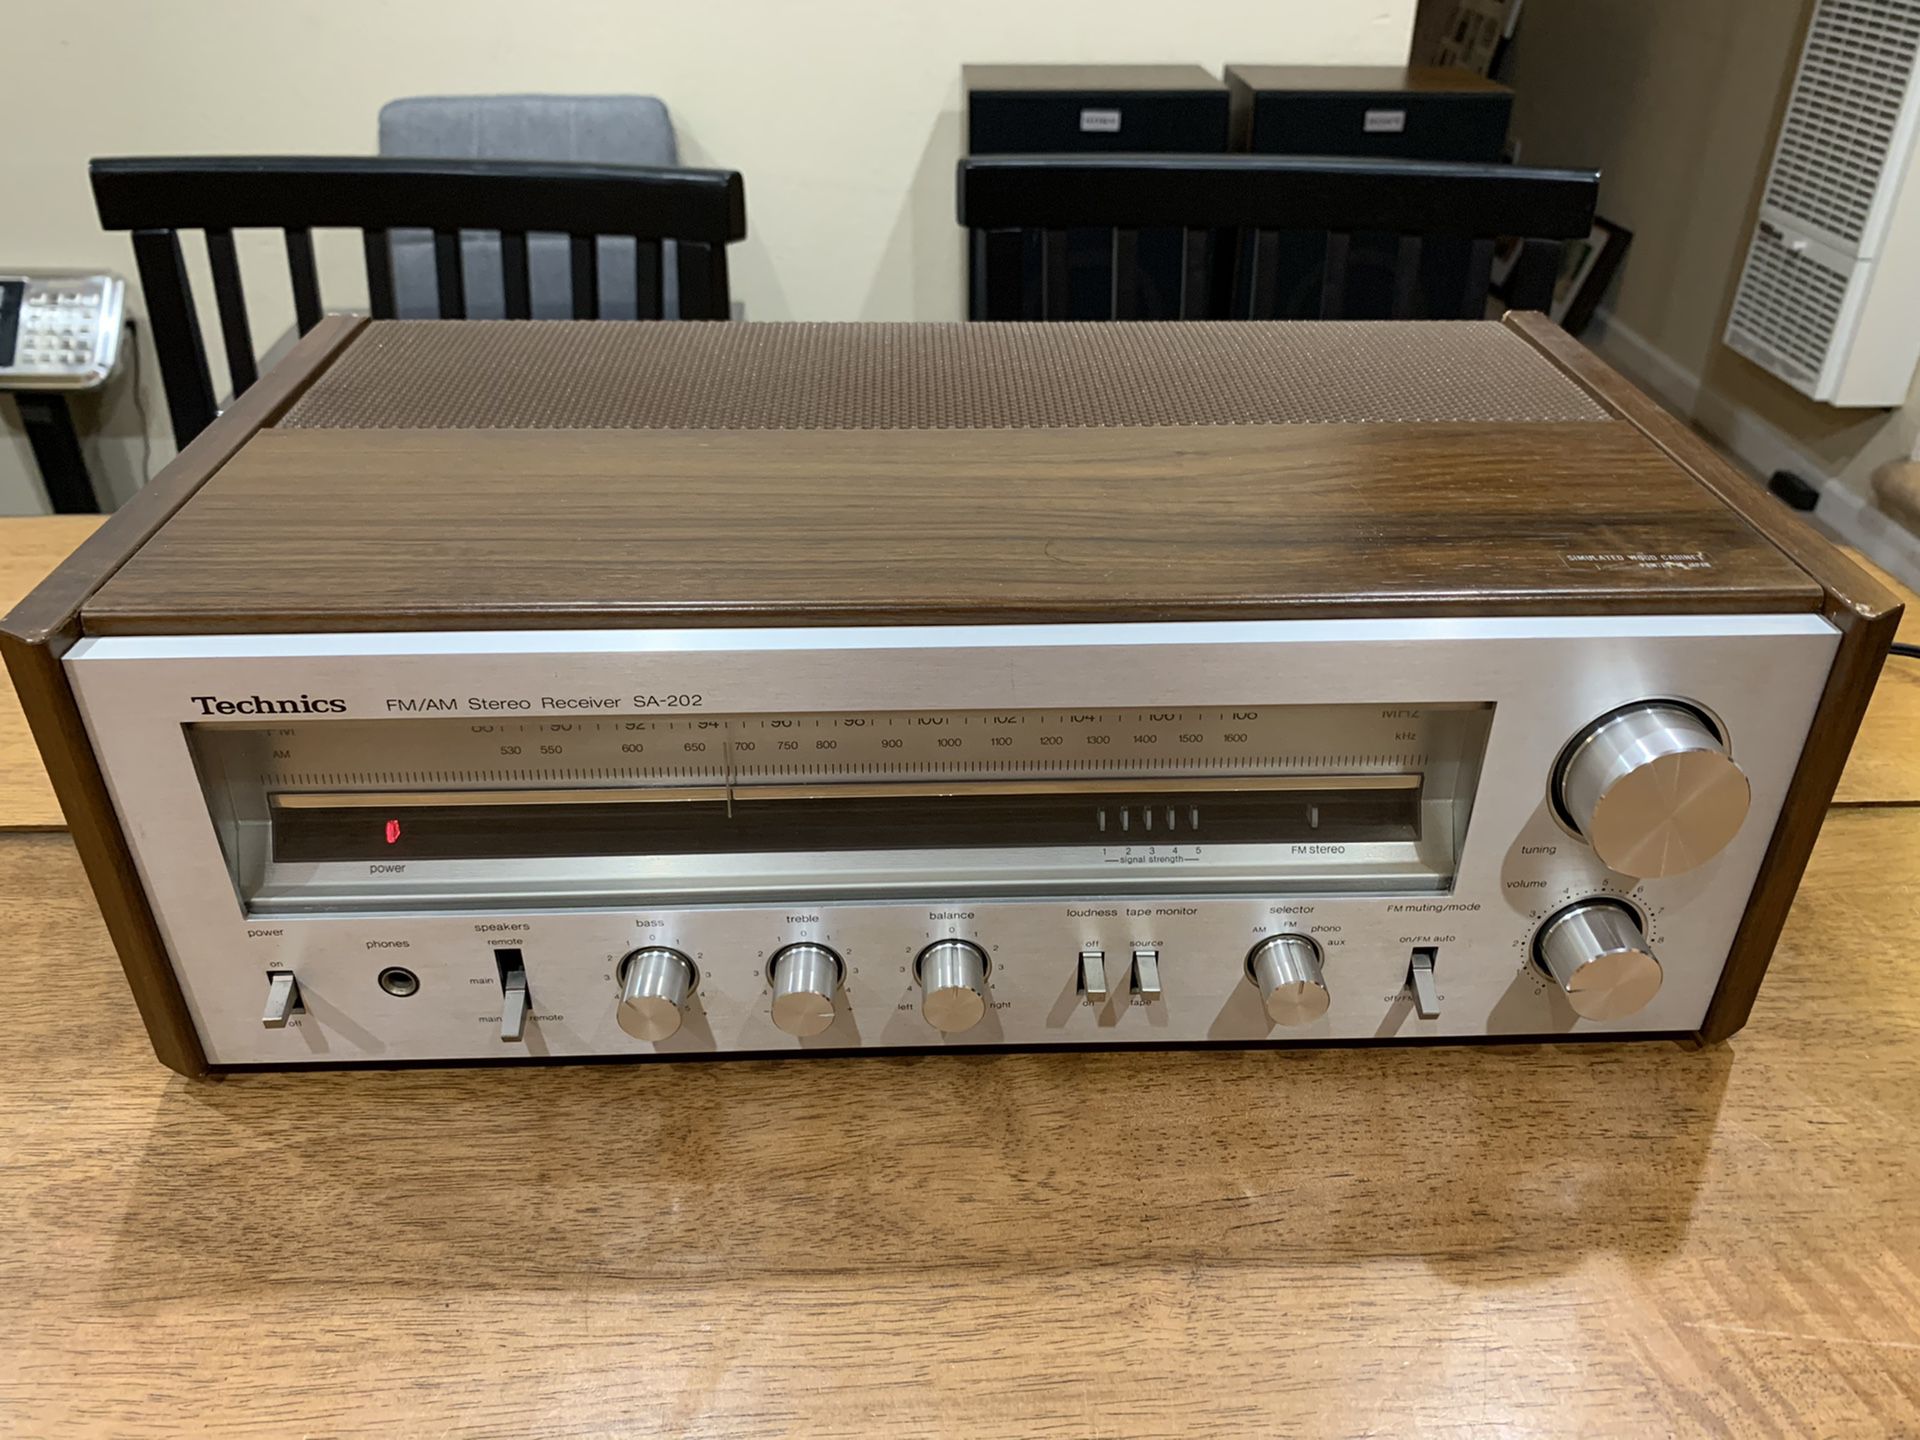 Vintage Technics FM/AM Stereo Receiver SA-202 Tested and Partially Working